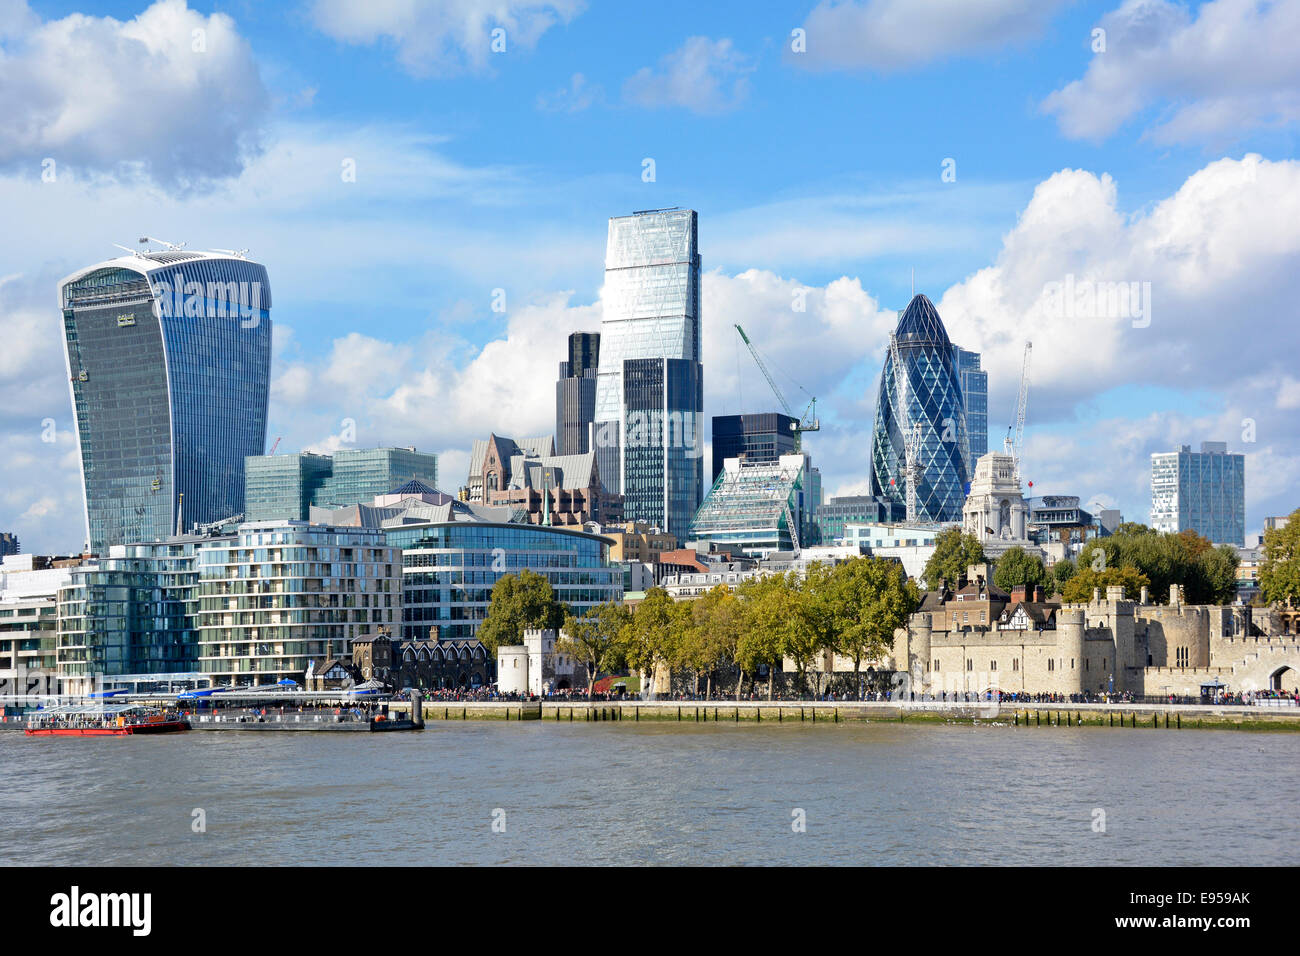 Gherkin Cheesegrater and  Walkie Talkie skyscraper office blocks dwarf the ancient Tower of London Stock Photo